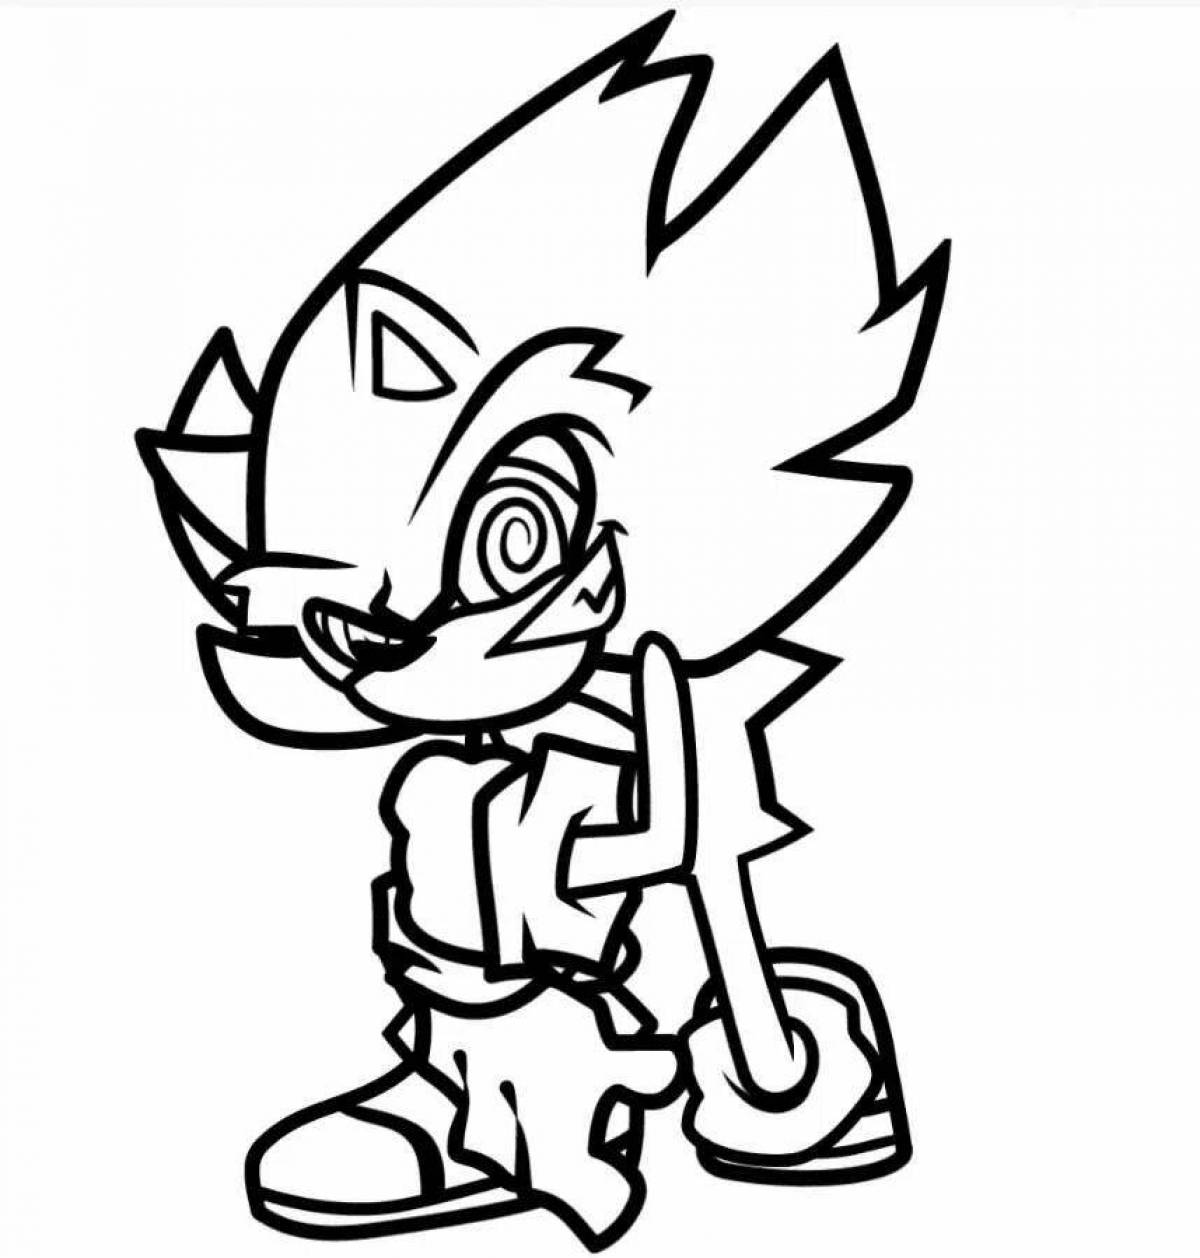 Sonicexe fnf playful coloring